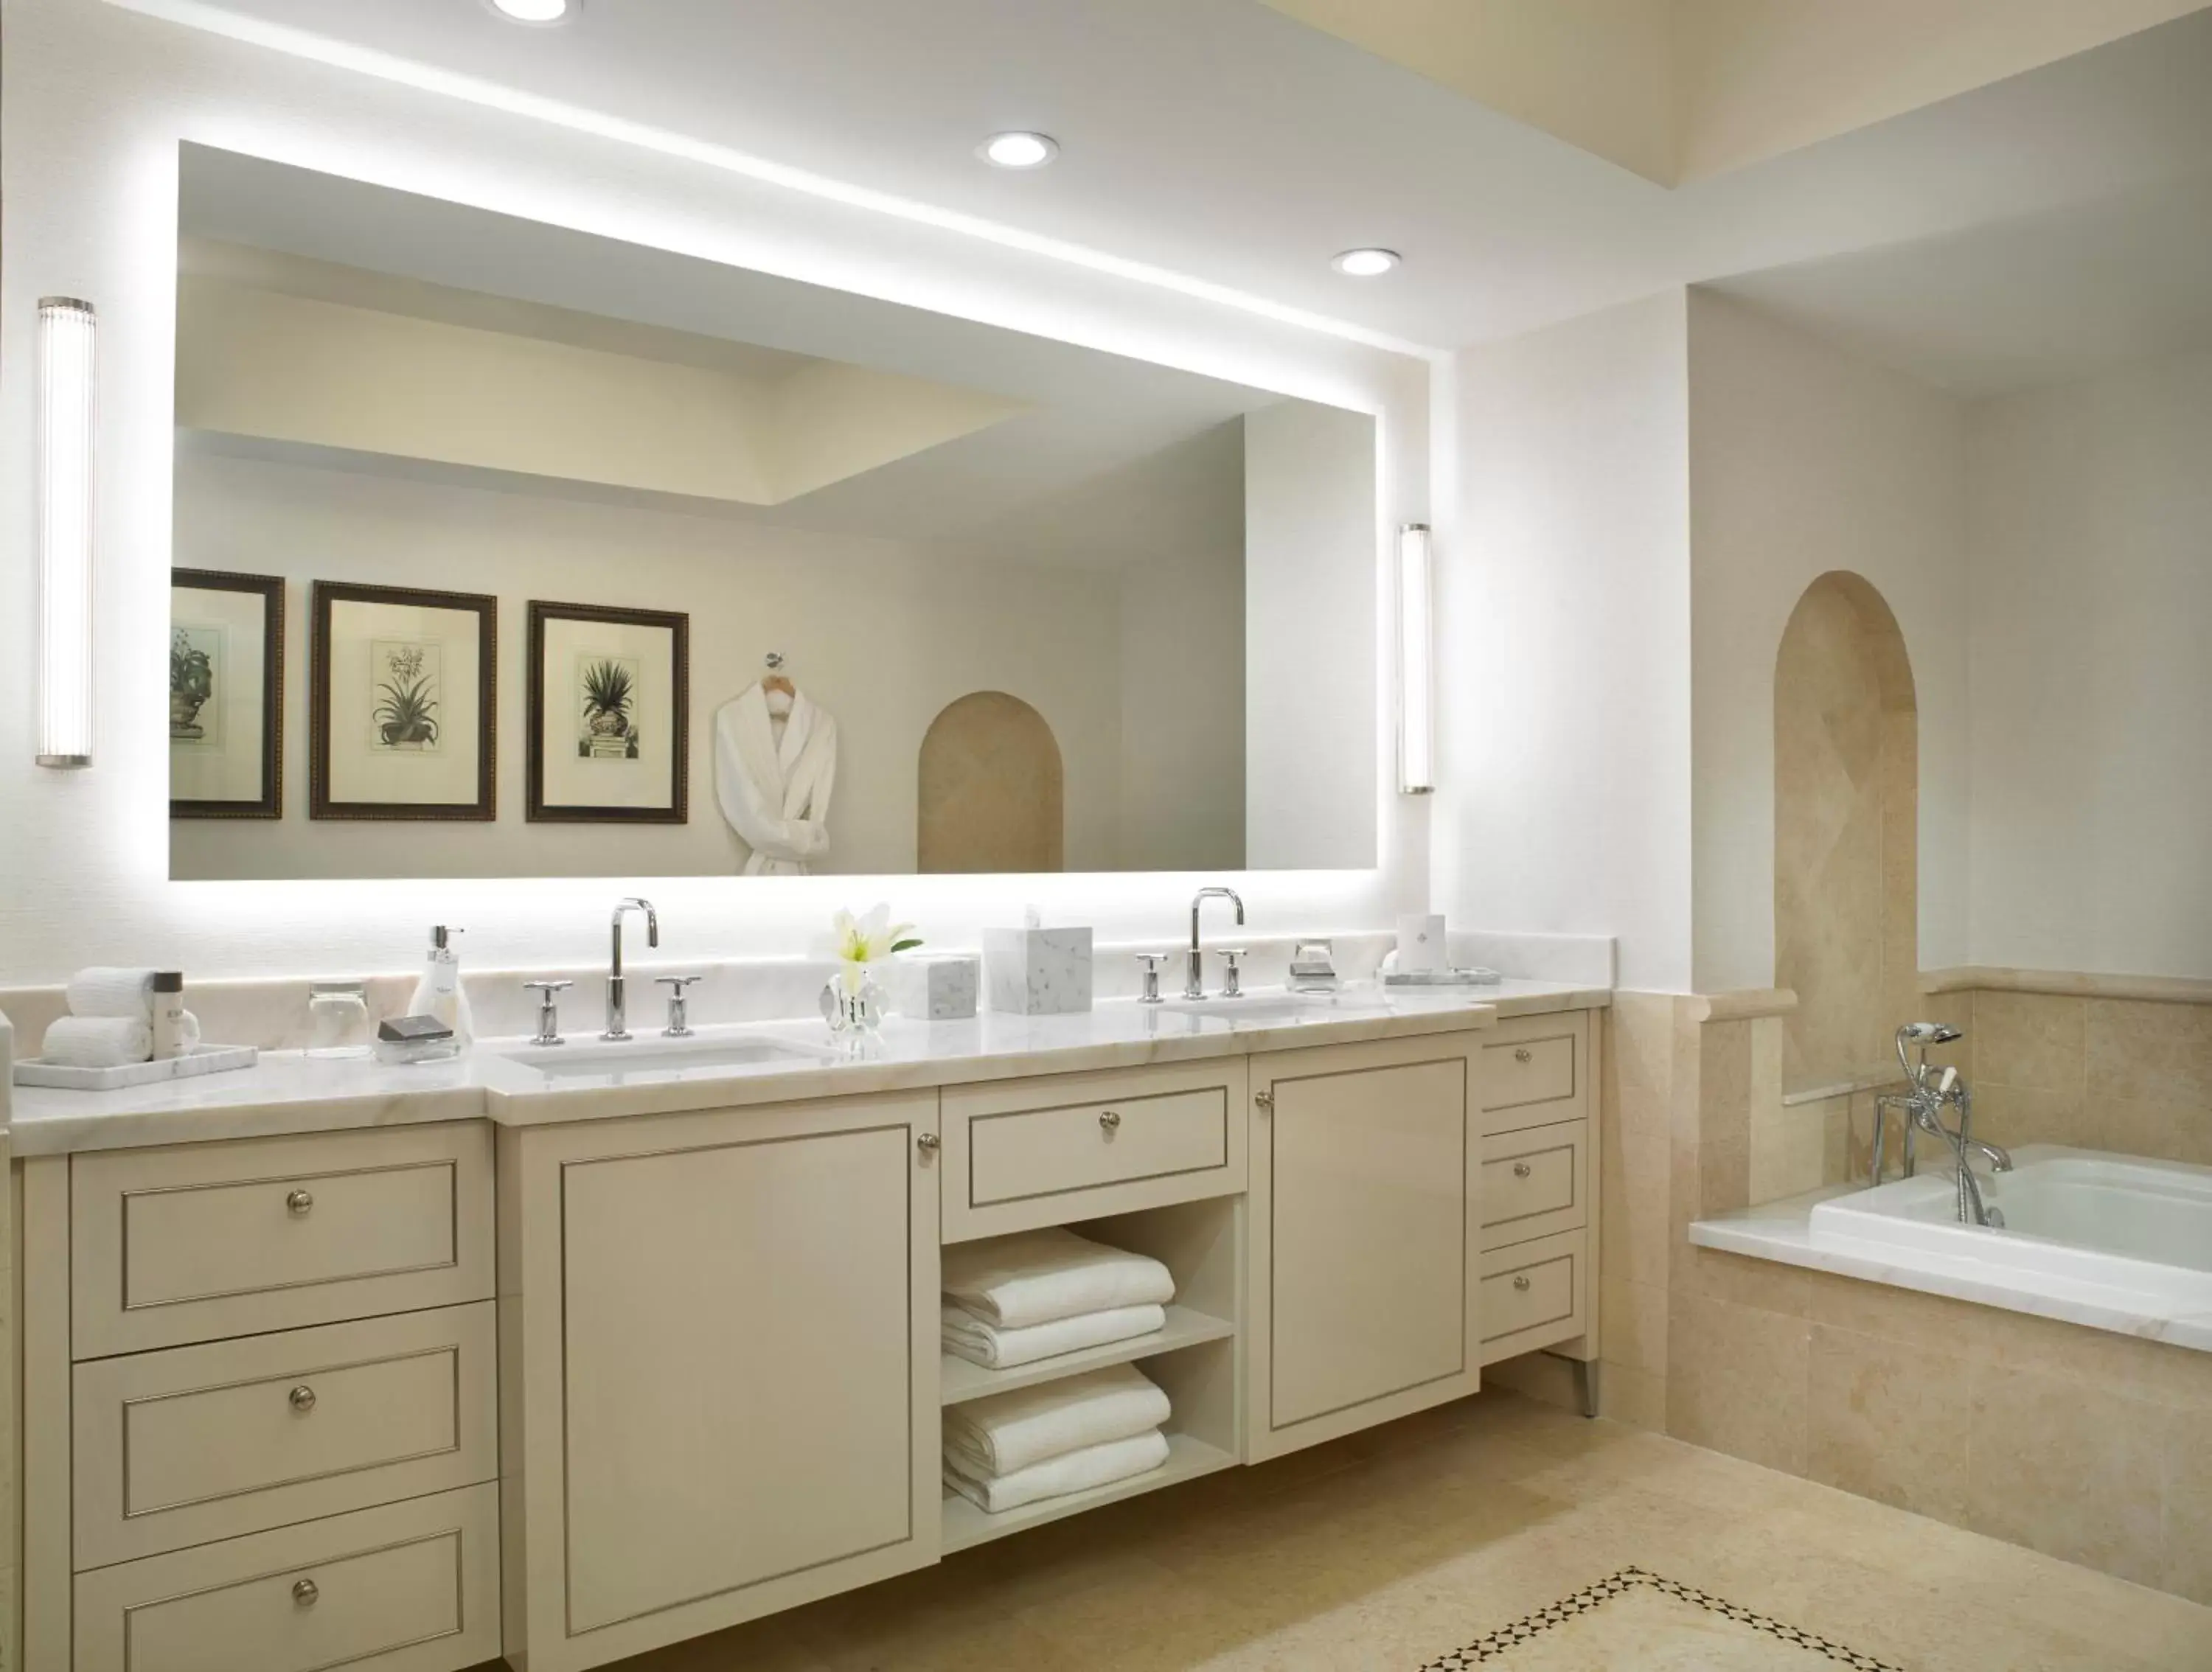 Bathroom in Acqualina Resort and Residences